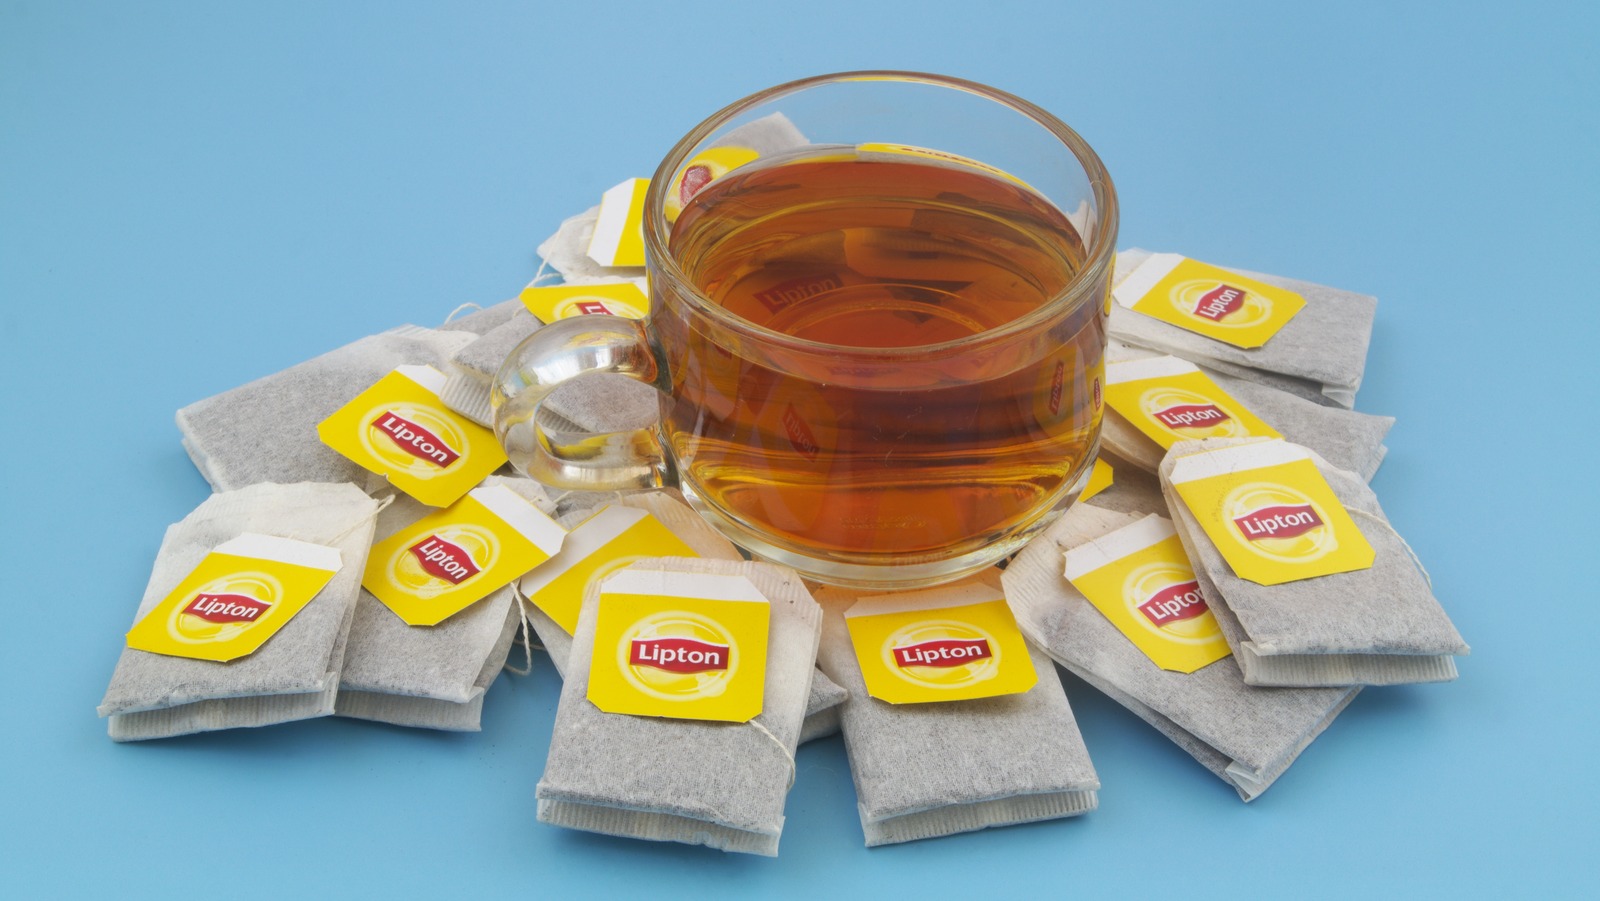 https://www.mashed.com/img/gallery/lipton-ice-tea-just-announced-a-new-drink-only-for-adults/l-intro-1665509139.jpg